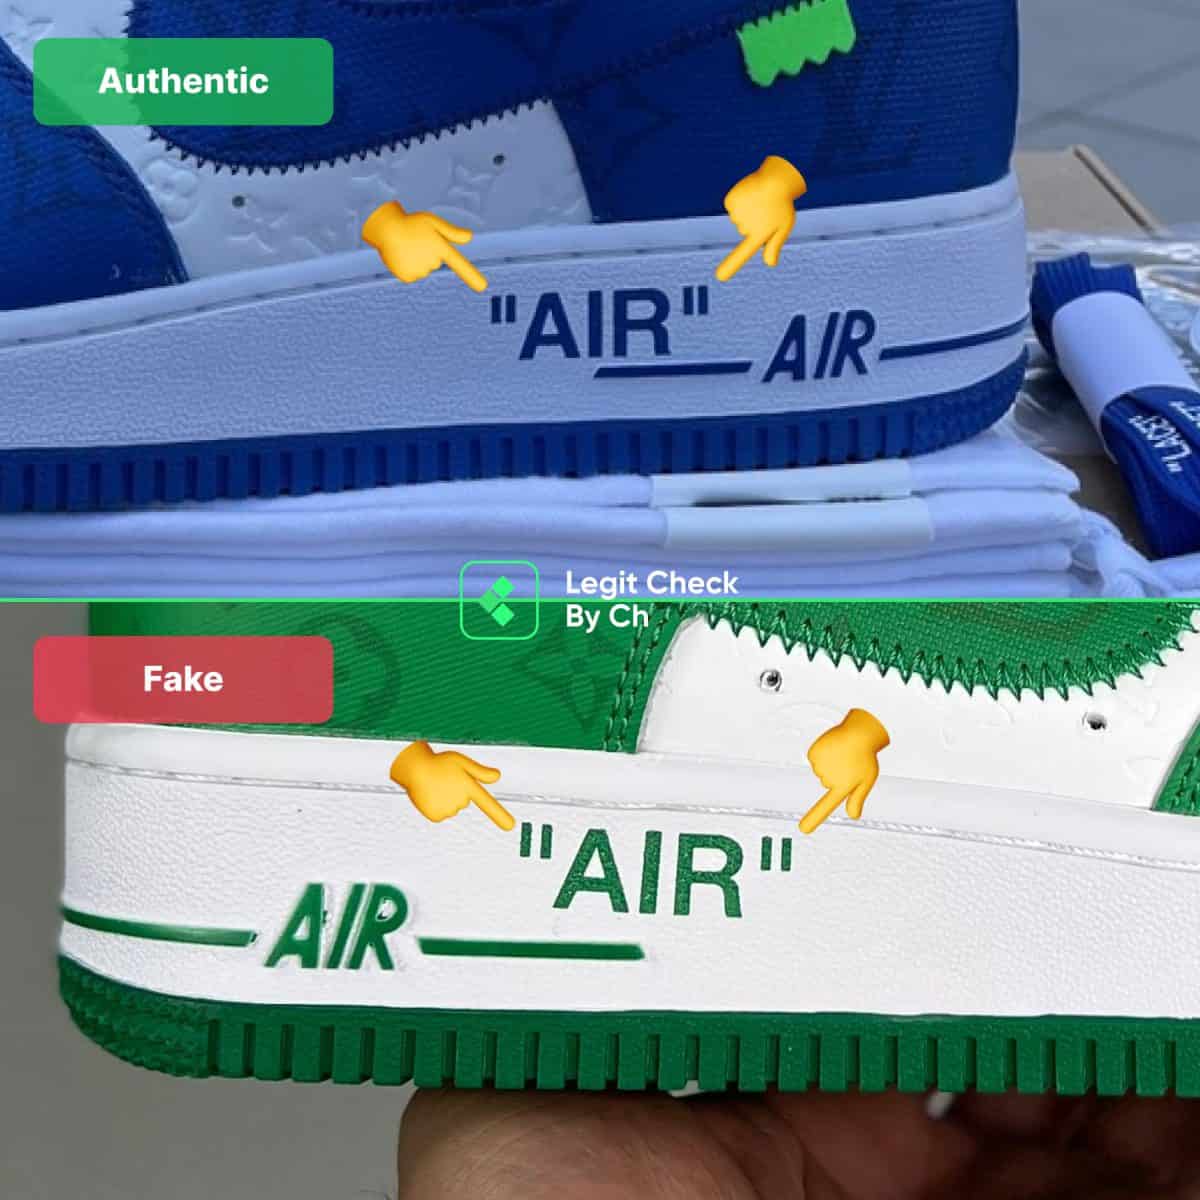 Louis Vuitton Air Force 1 Fake Vs Real Guide